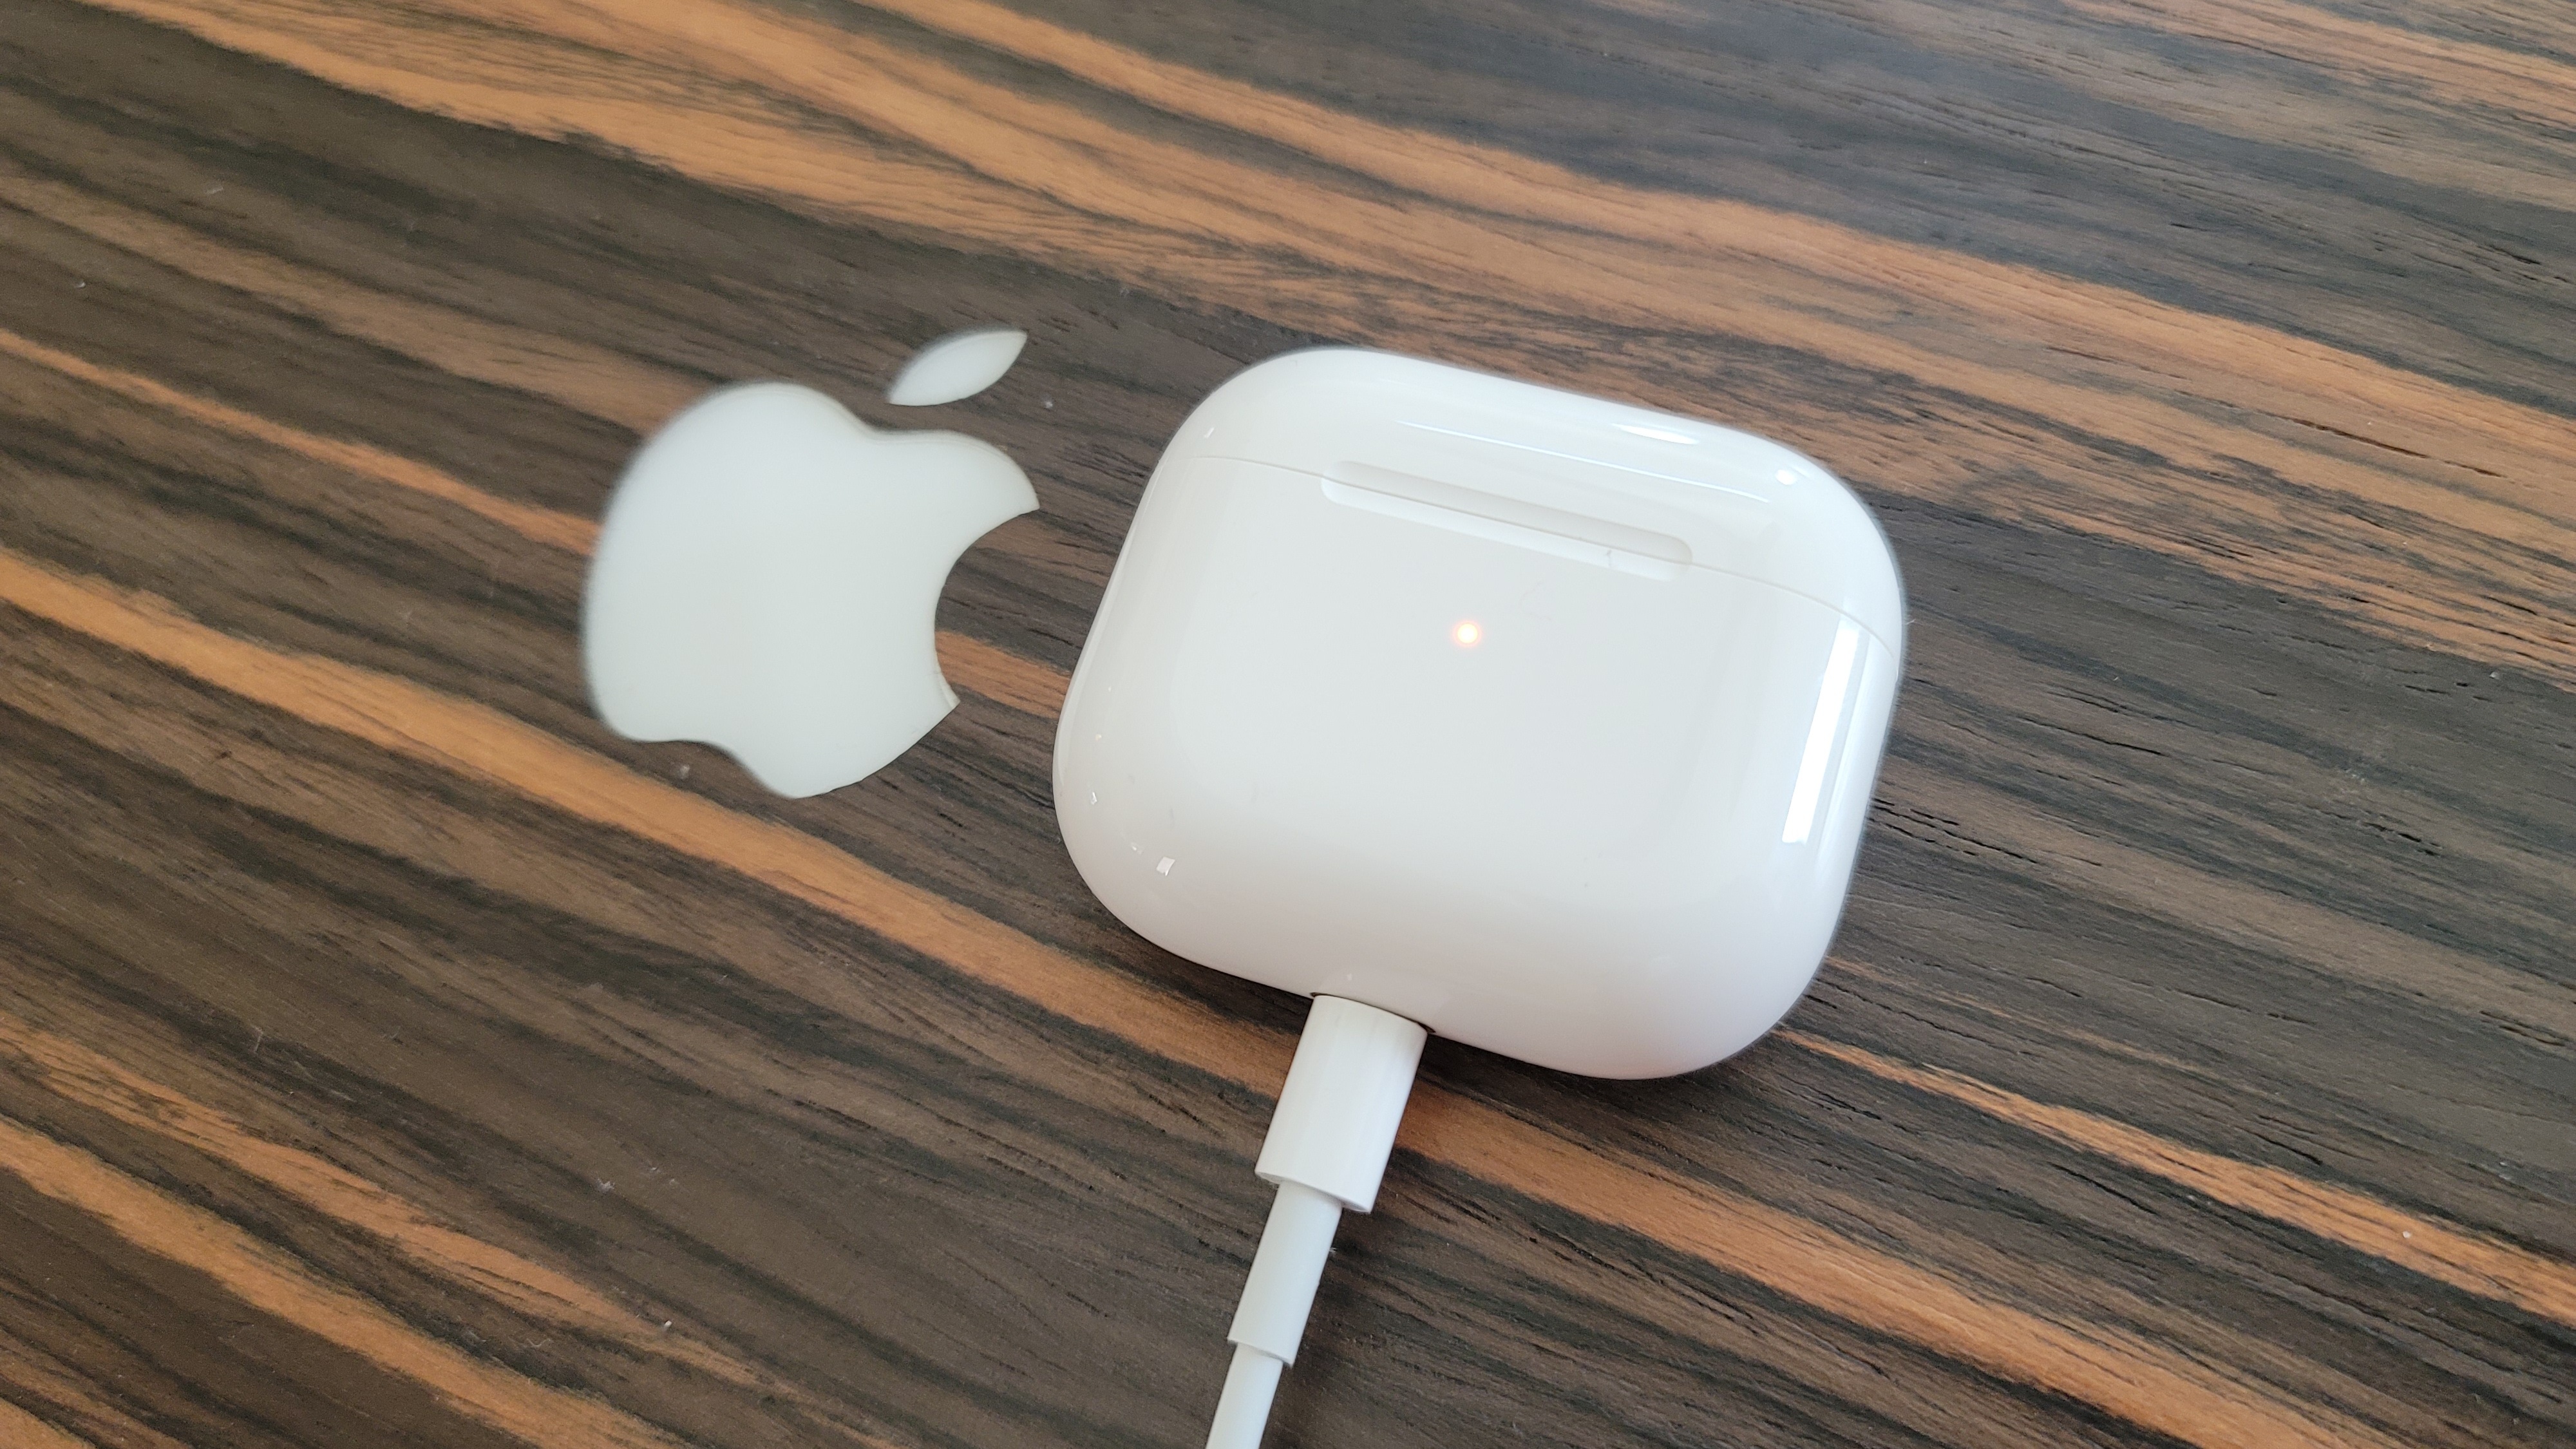 Apple AirPods 3 is connected to a Lightning charging cable